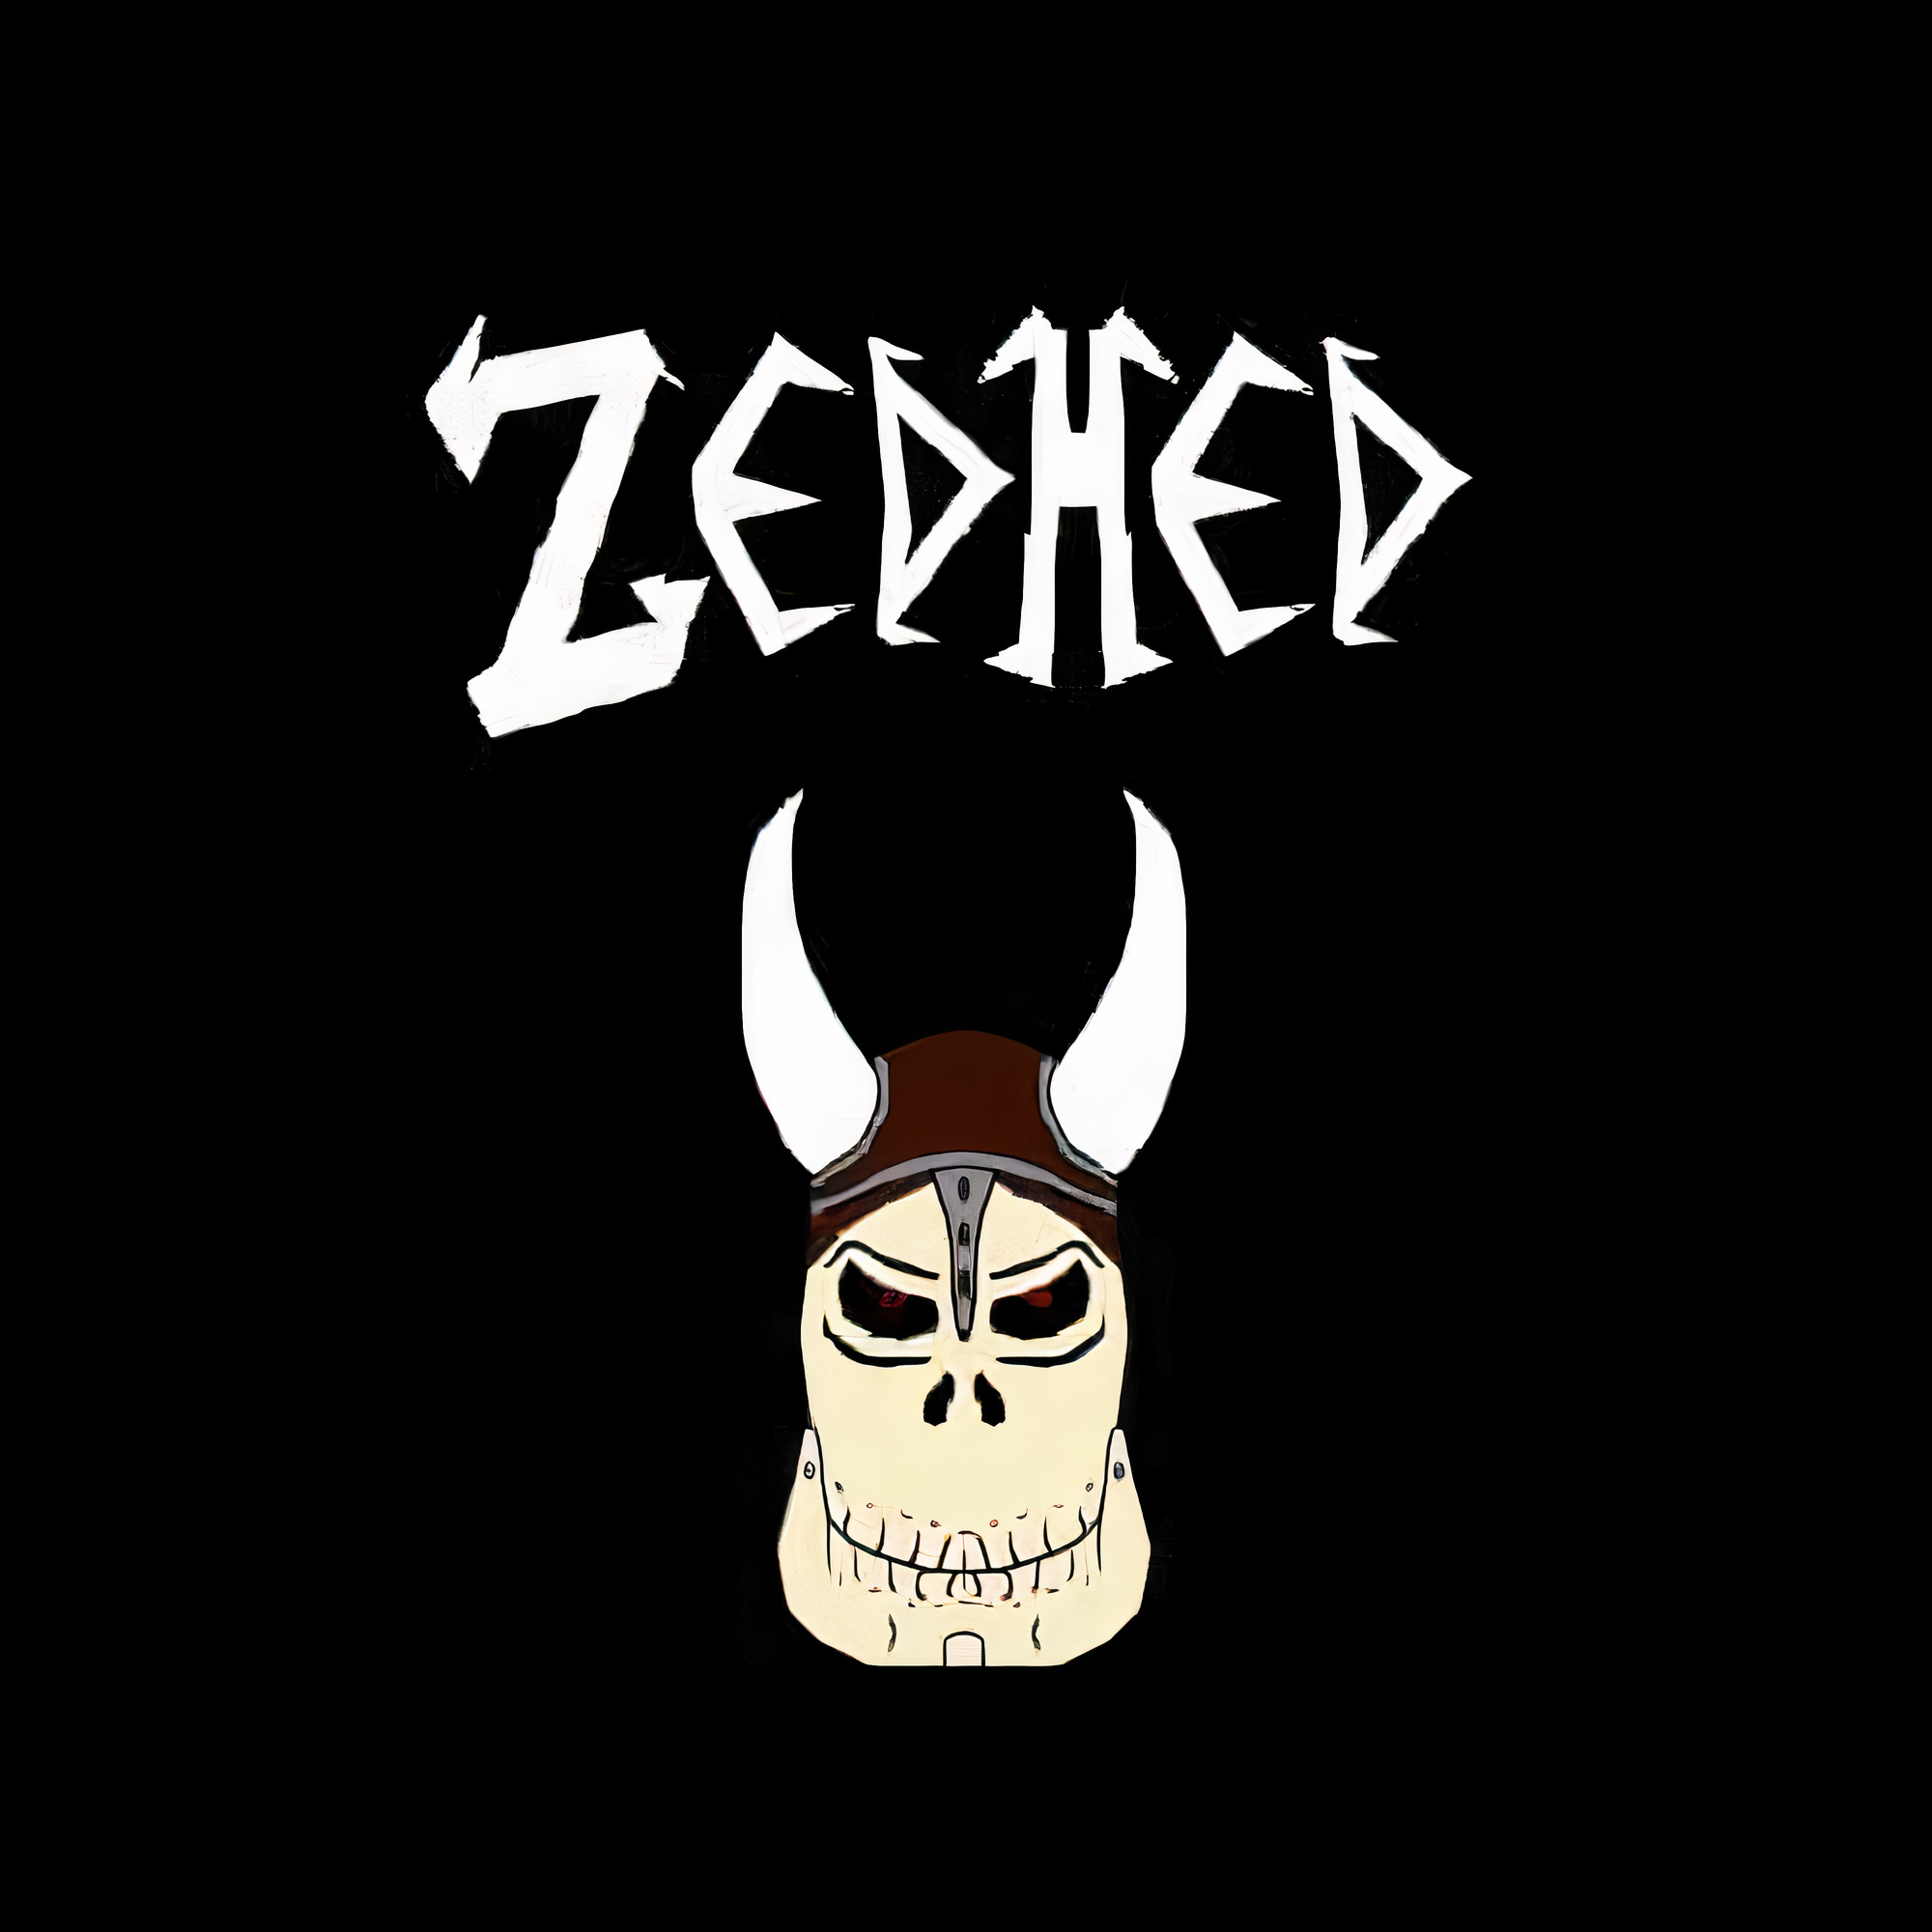 ZedHed - The Beginning of All Zeds to End